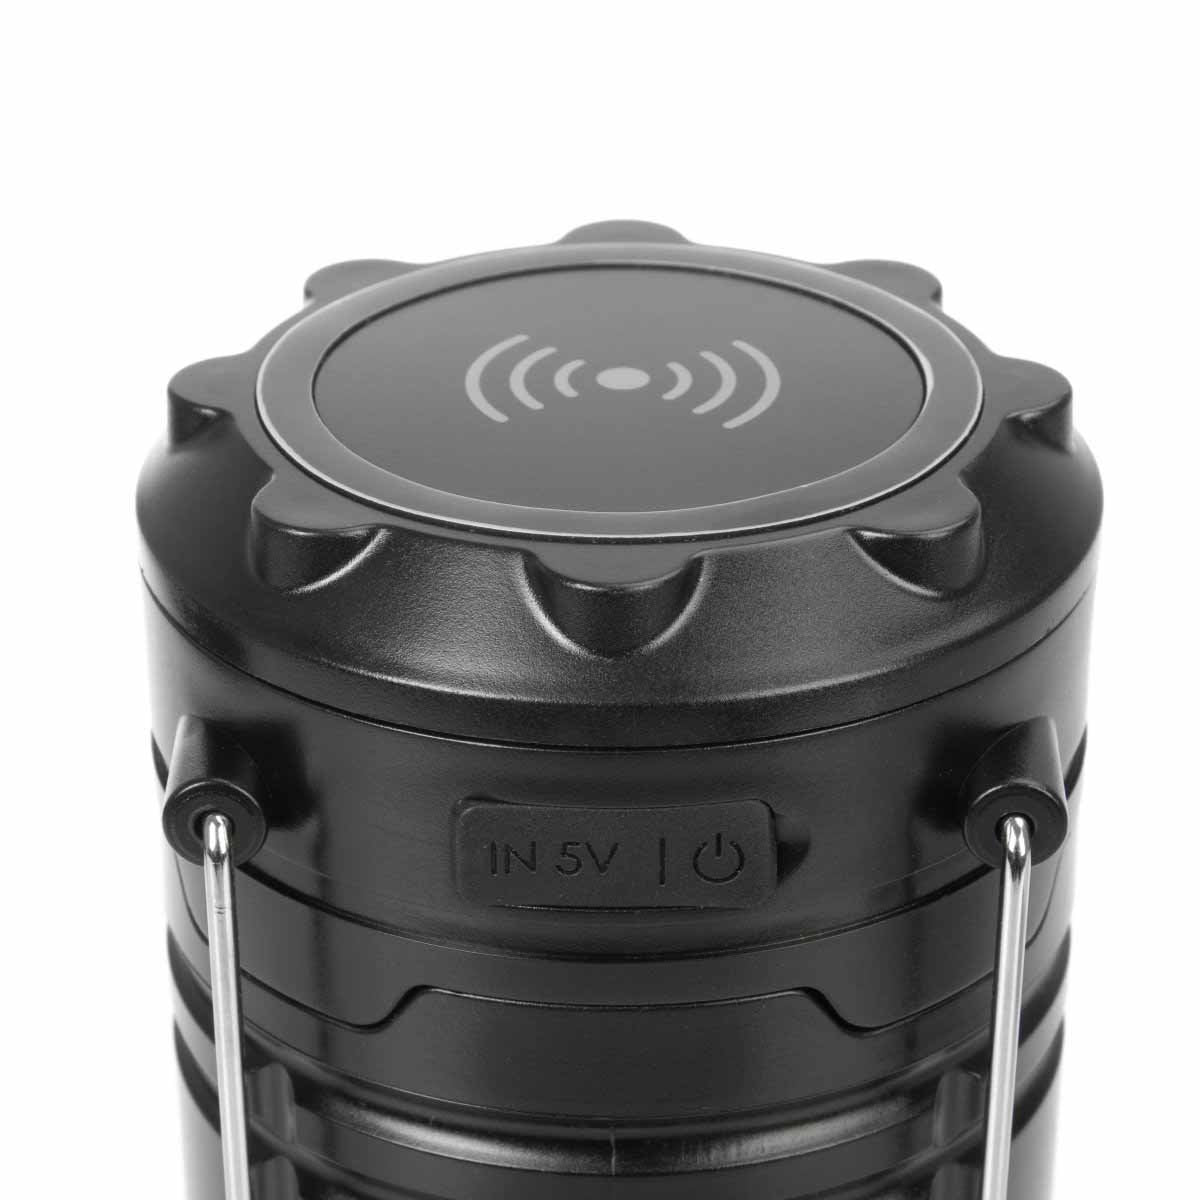 Pack of 2 Collapsible Camping Lanterns with Power Bank, Wireless Charger